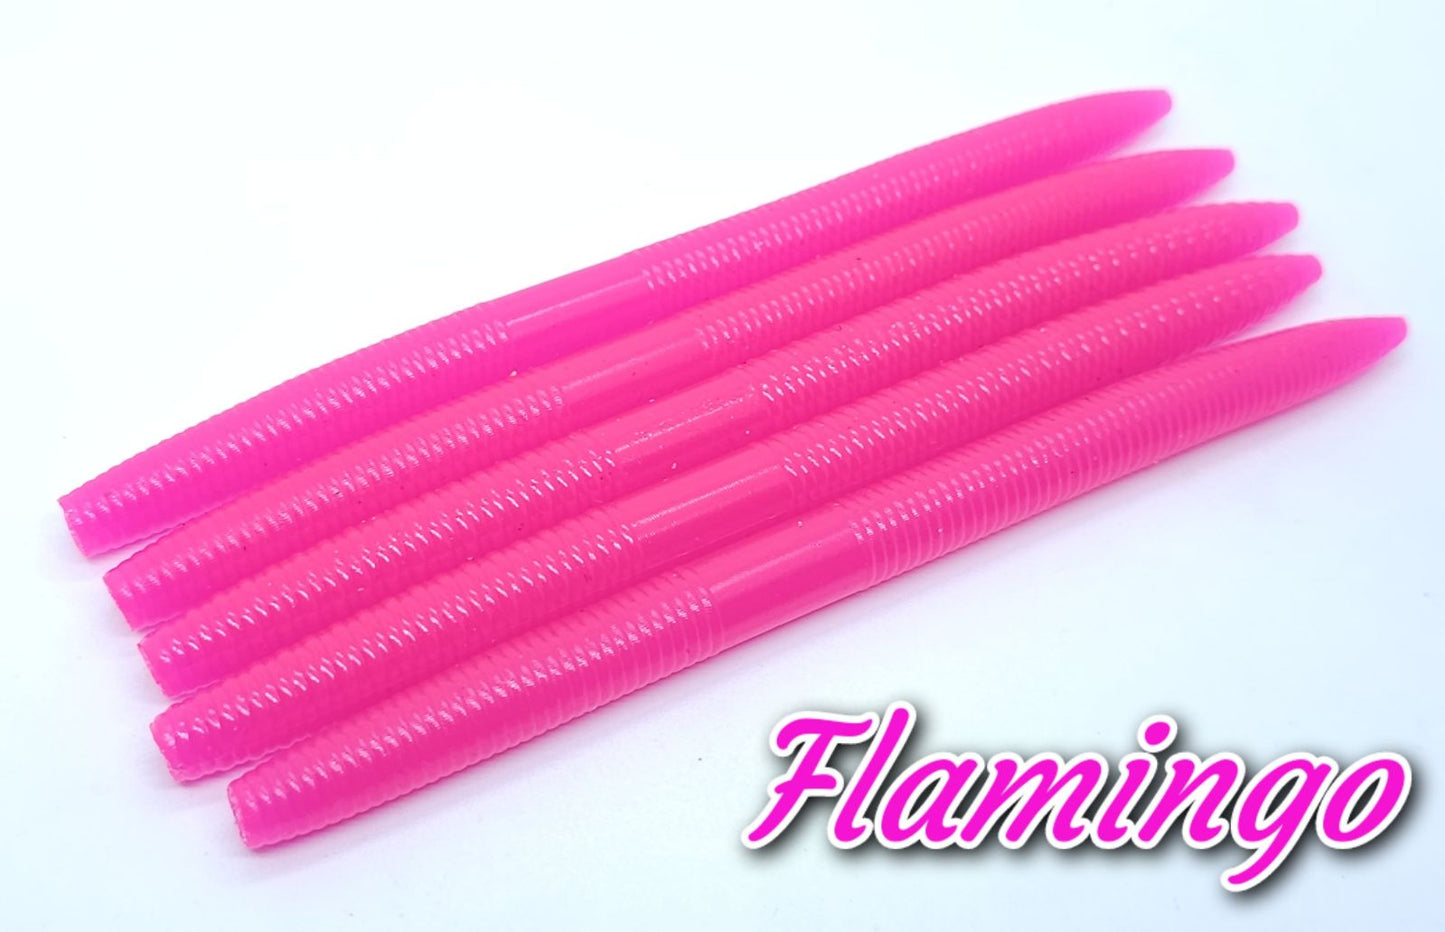 SW-12 Flamingo Hot Pink Stick Worm 8 pack